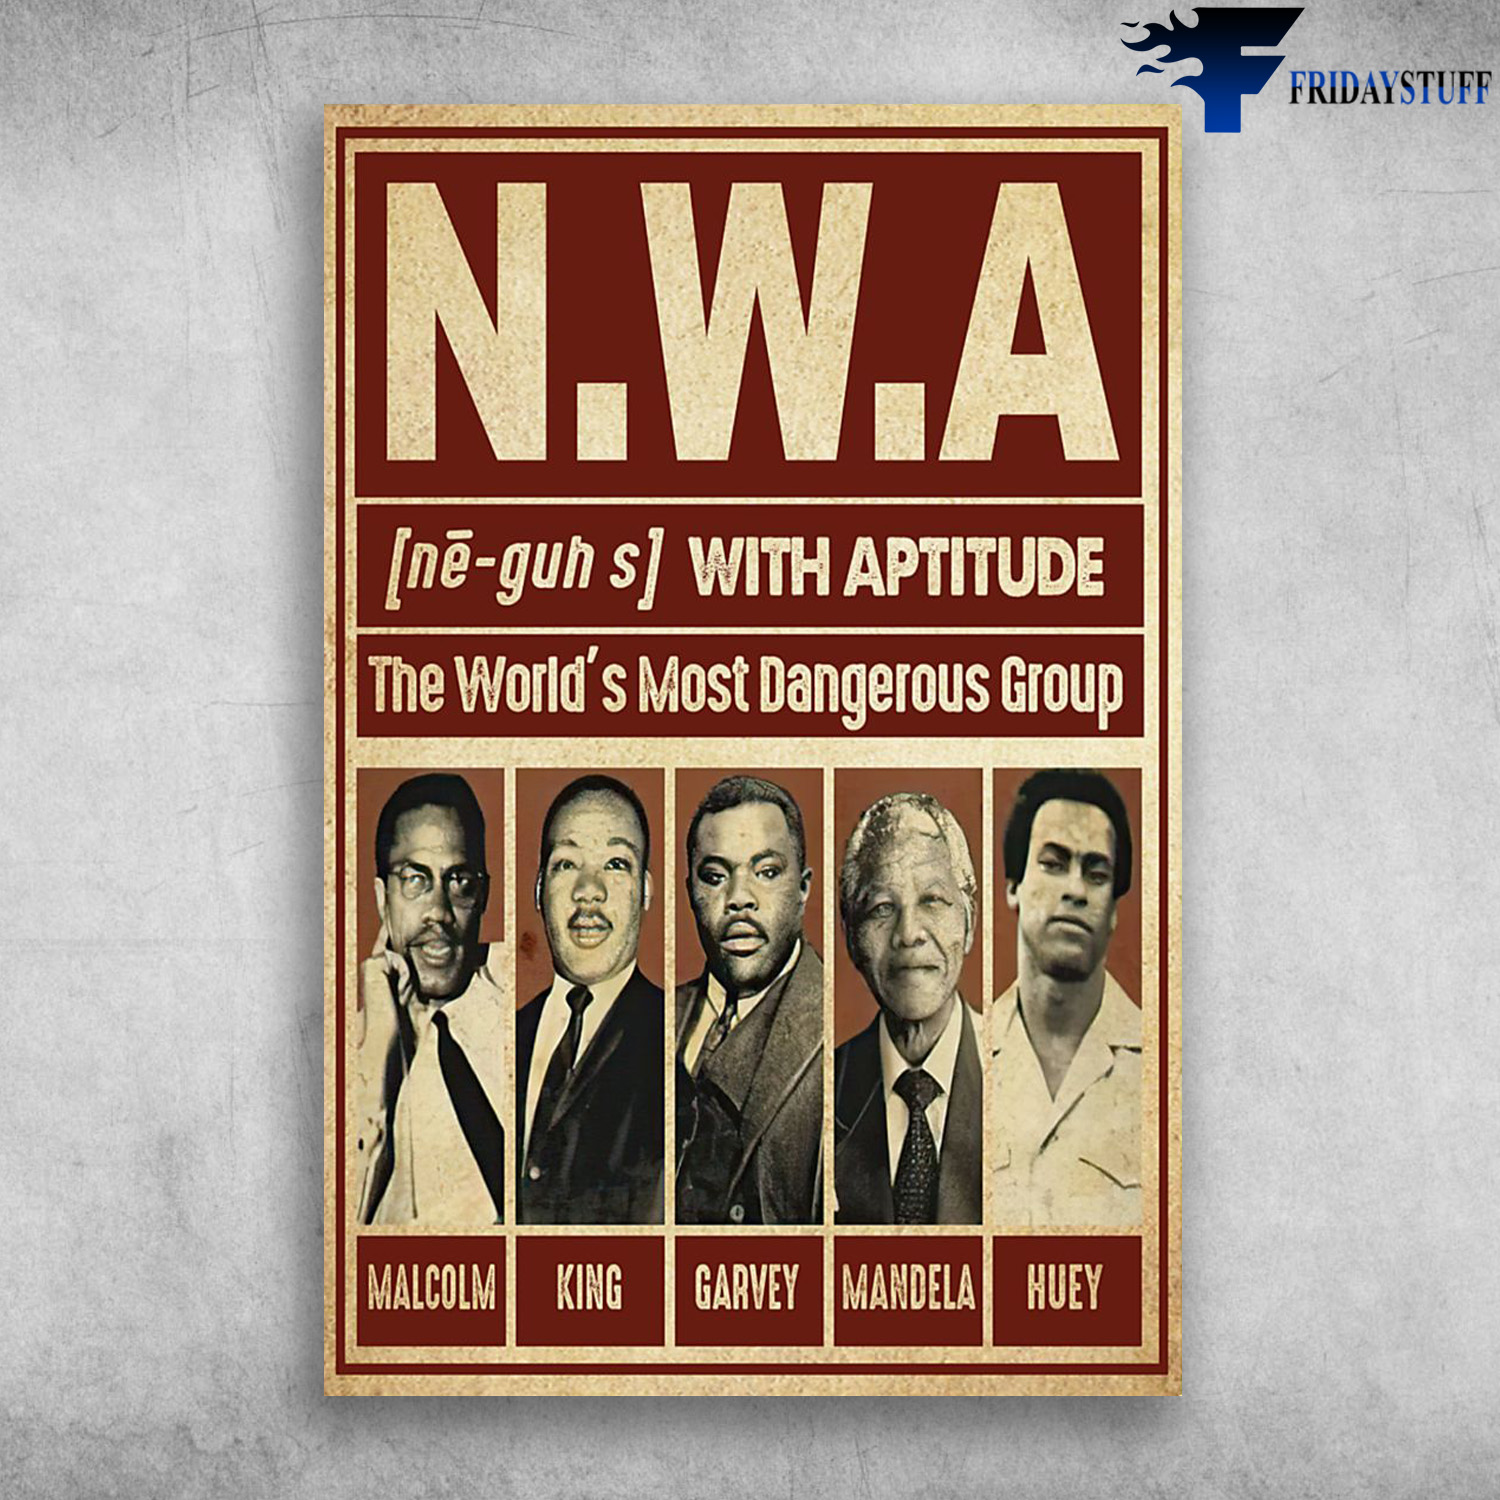 N.W.A - With Aptitude, The Word's Comst Dangerous Group, Malcolm, King, Garbey, Mandela Huey